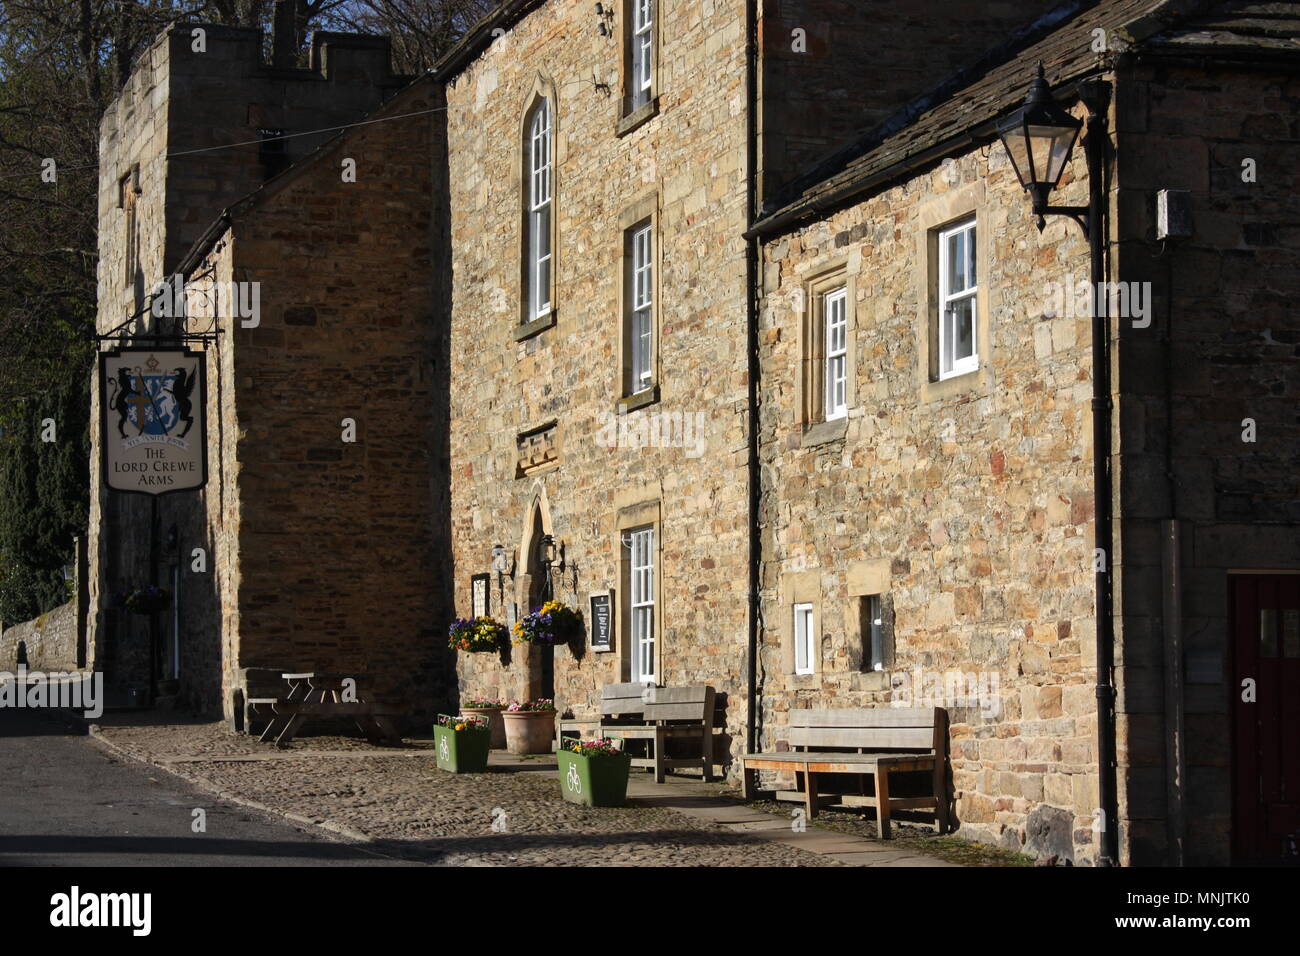 Il Signore Crewe Arms in Blanchland, Northumberland Foto Stock